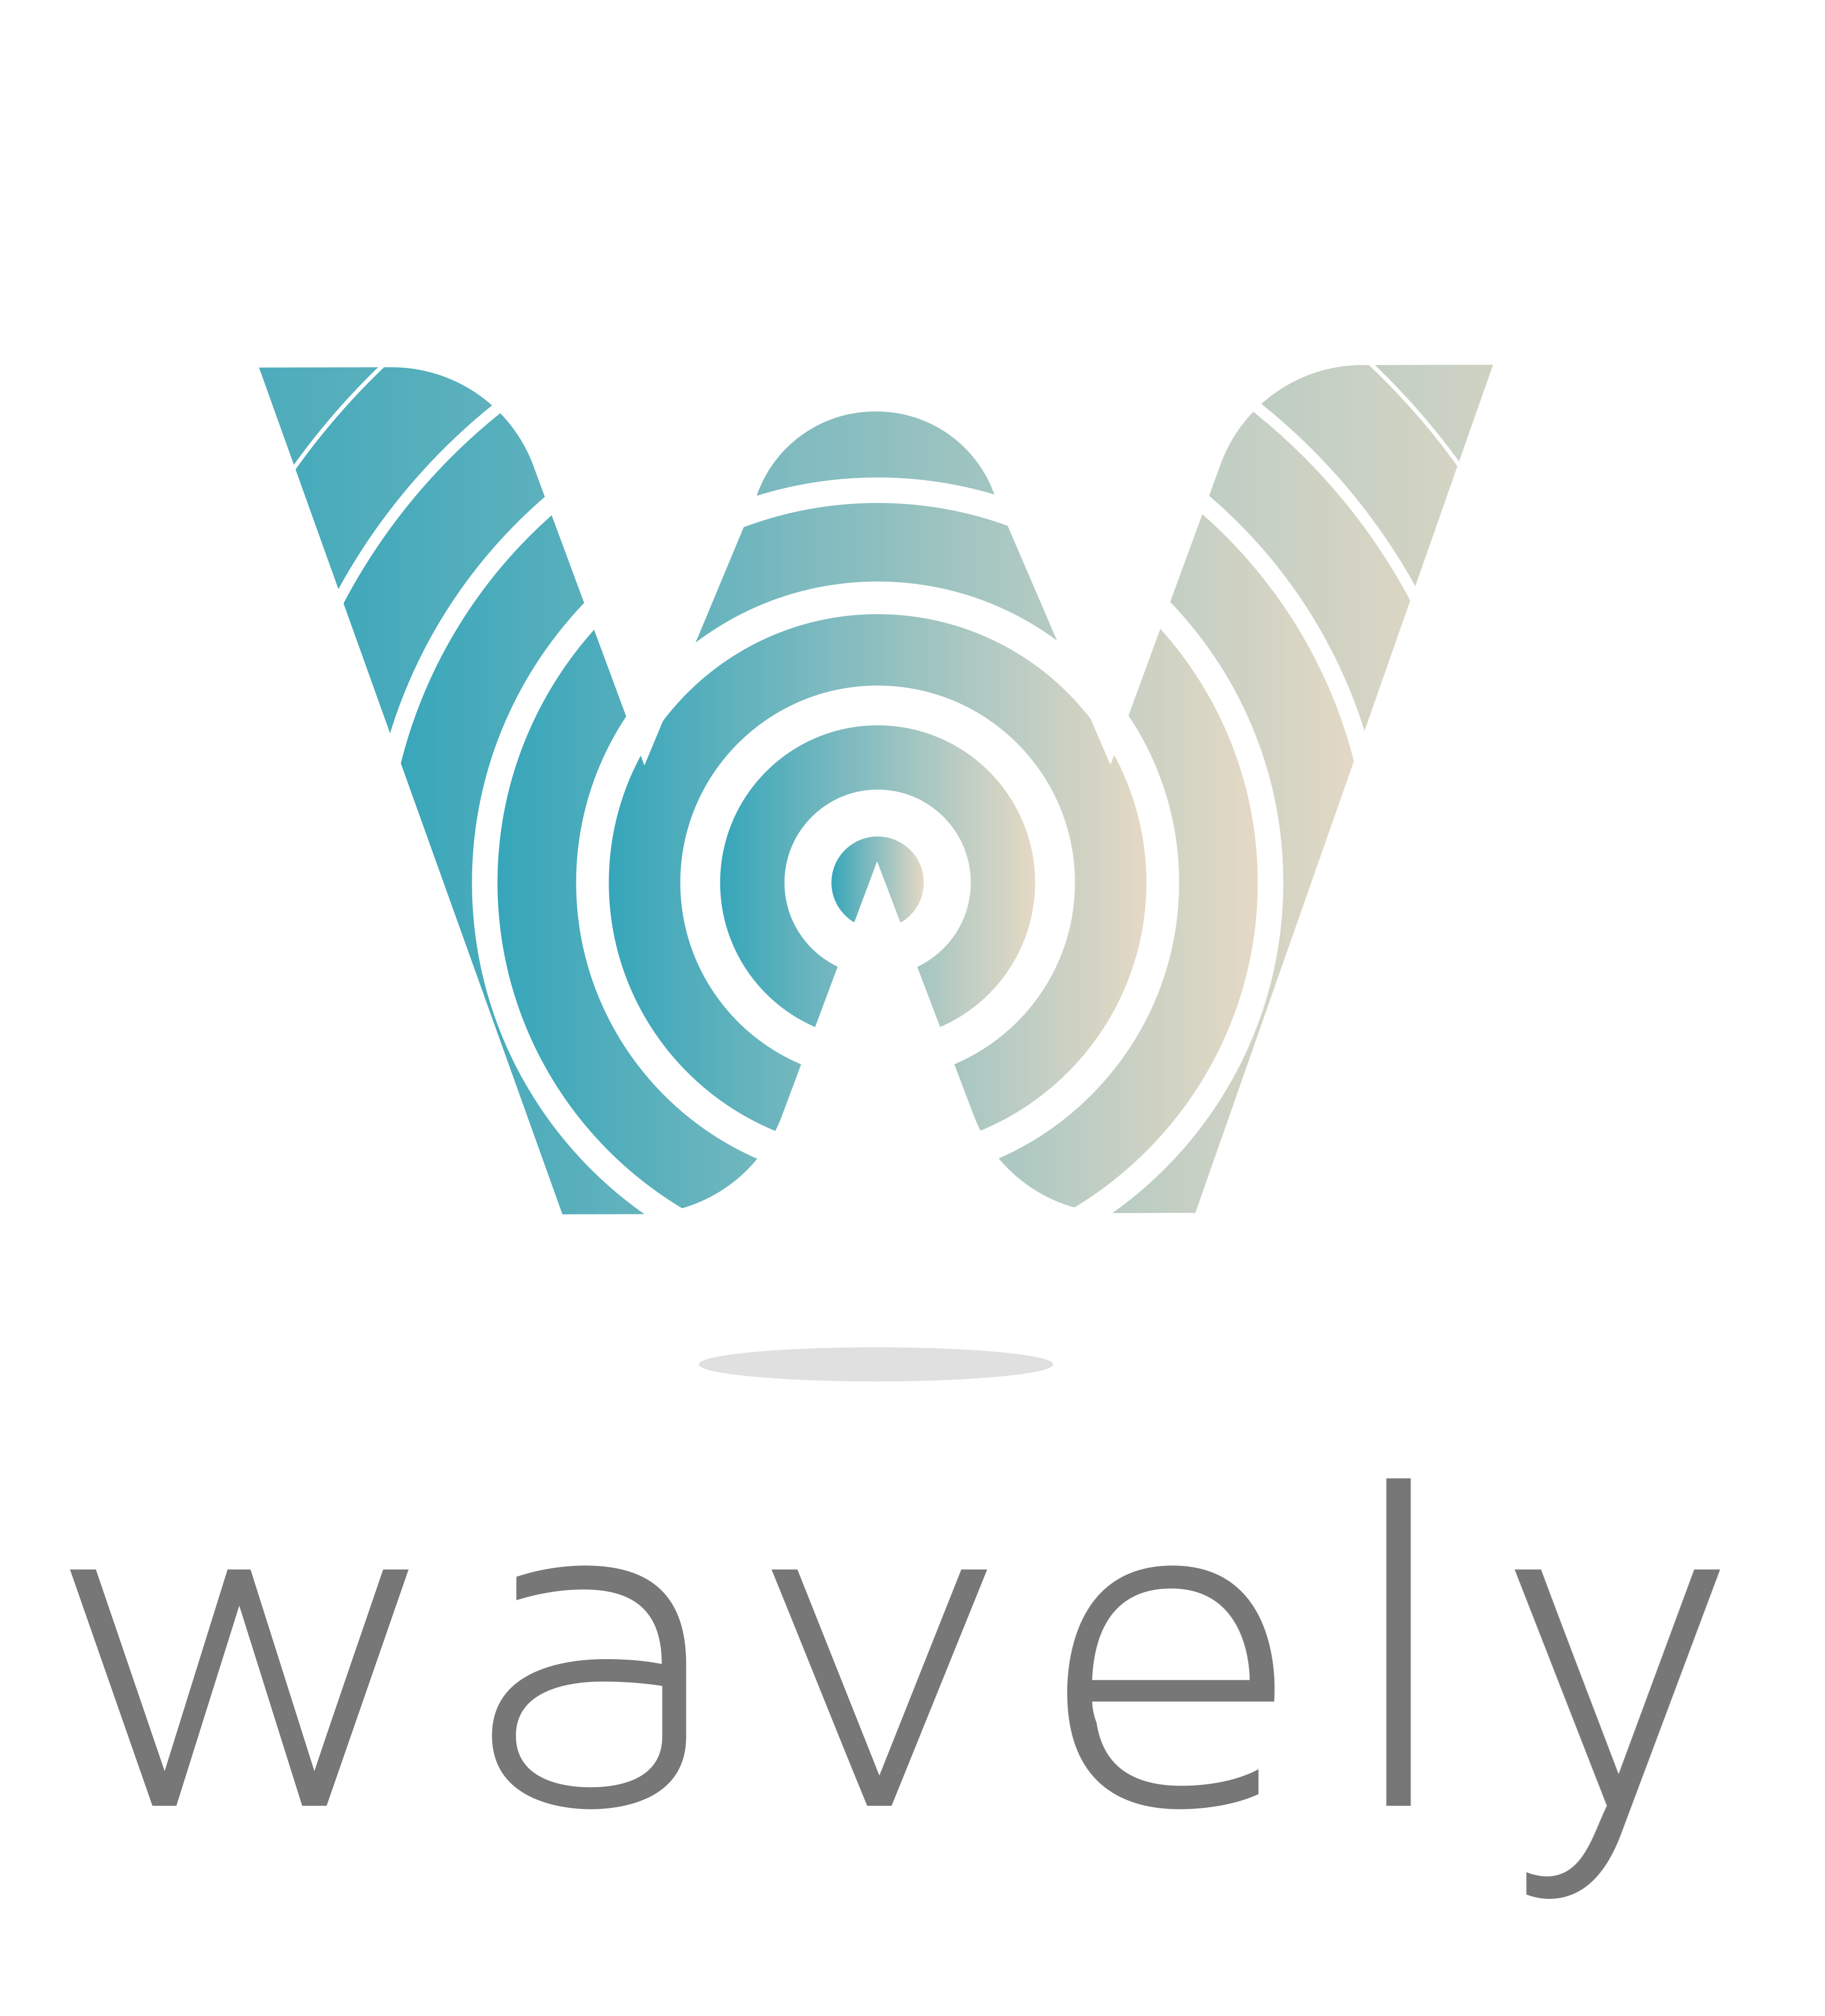 Wavely